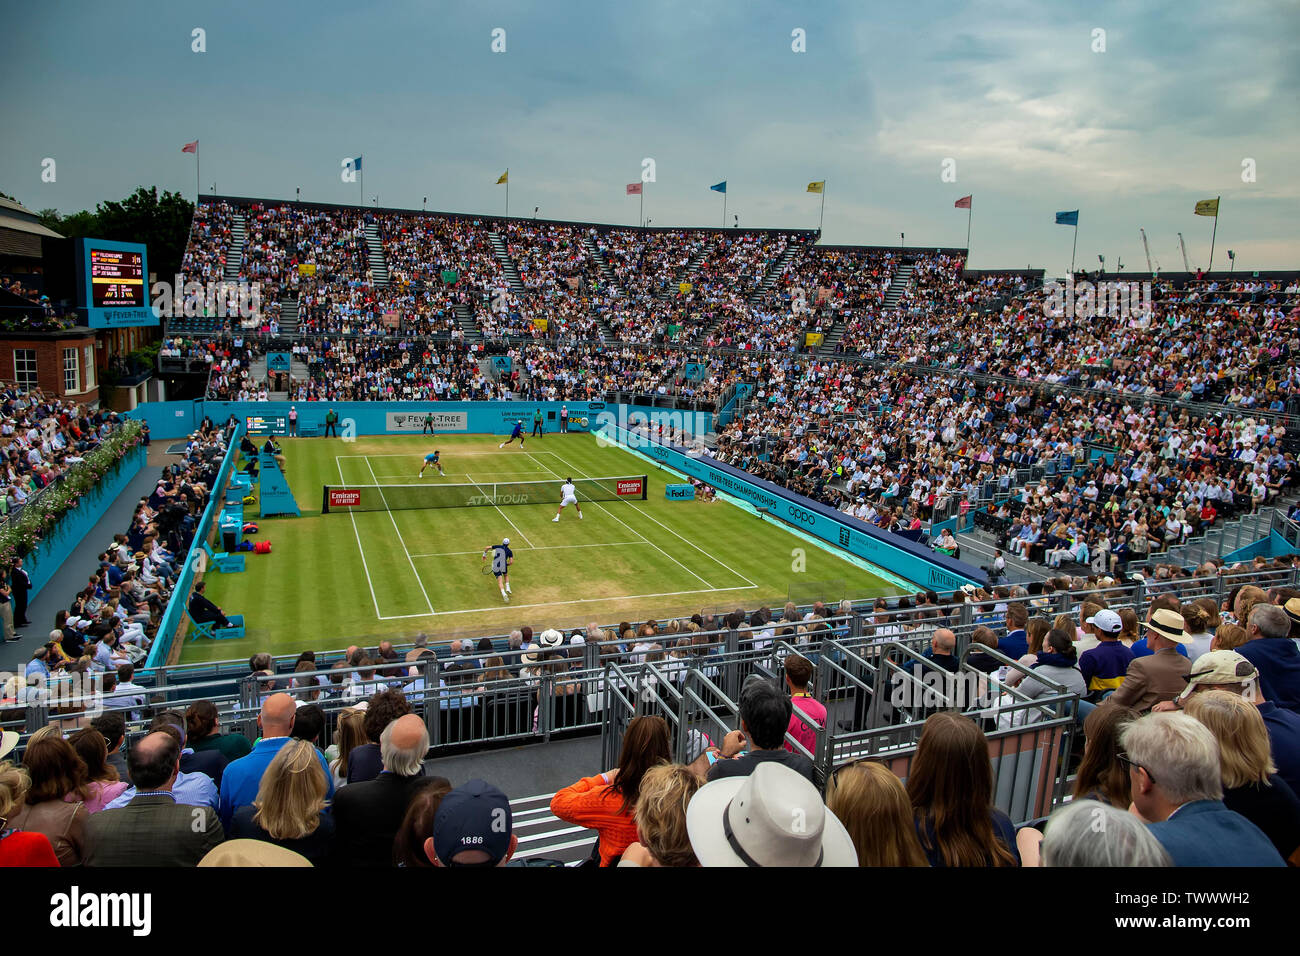 Queens Club, London, UK. 23rd June, 2019. The ATP Fever-Tree Tennis  Tournament; A full crowd at Queens club watching Andy Murray (GBR) and  Feliciano Lopez (ESP) against Rajeev Ram (USA) and Joe